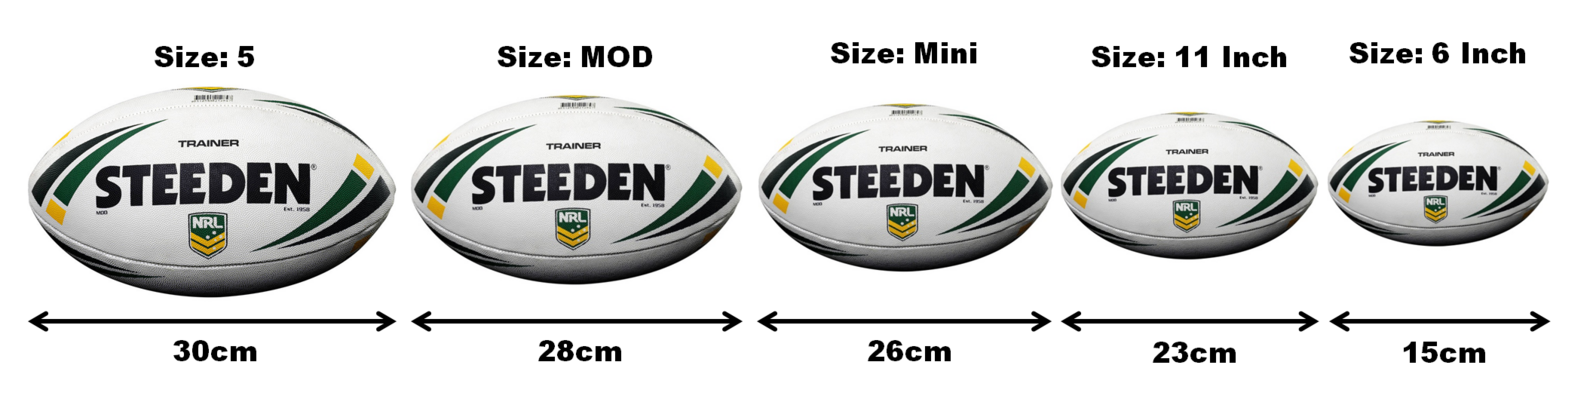 Penrith Panthers NRL 2021 Steeden Premiers Ball Football Size 5 *In Stock* 